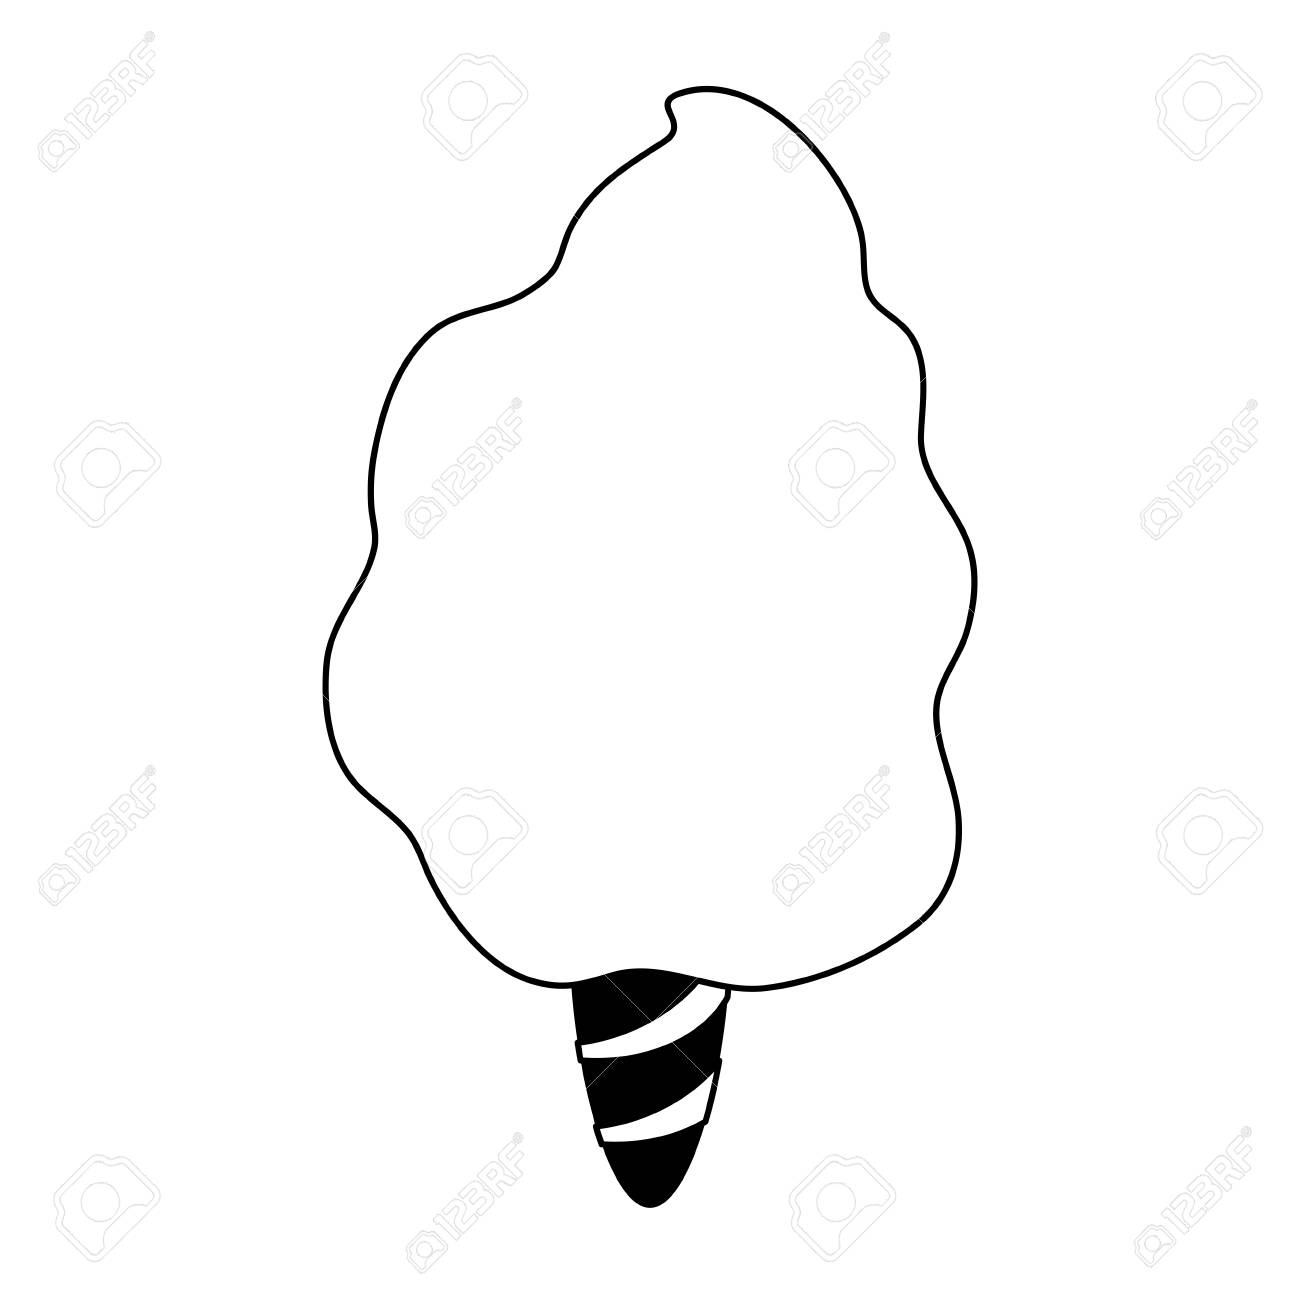 cotton candy icon image vector illustration design black and...